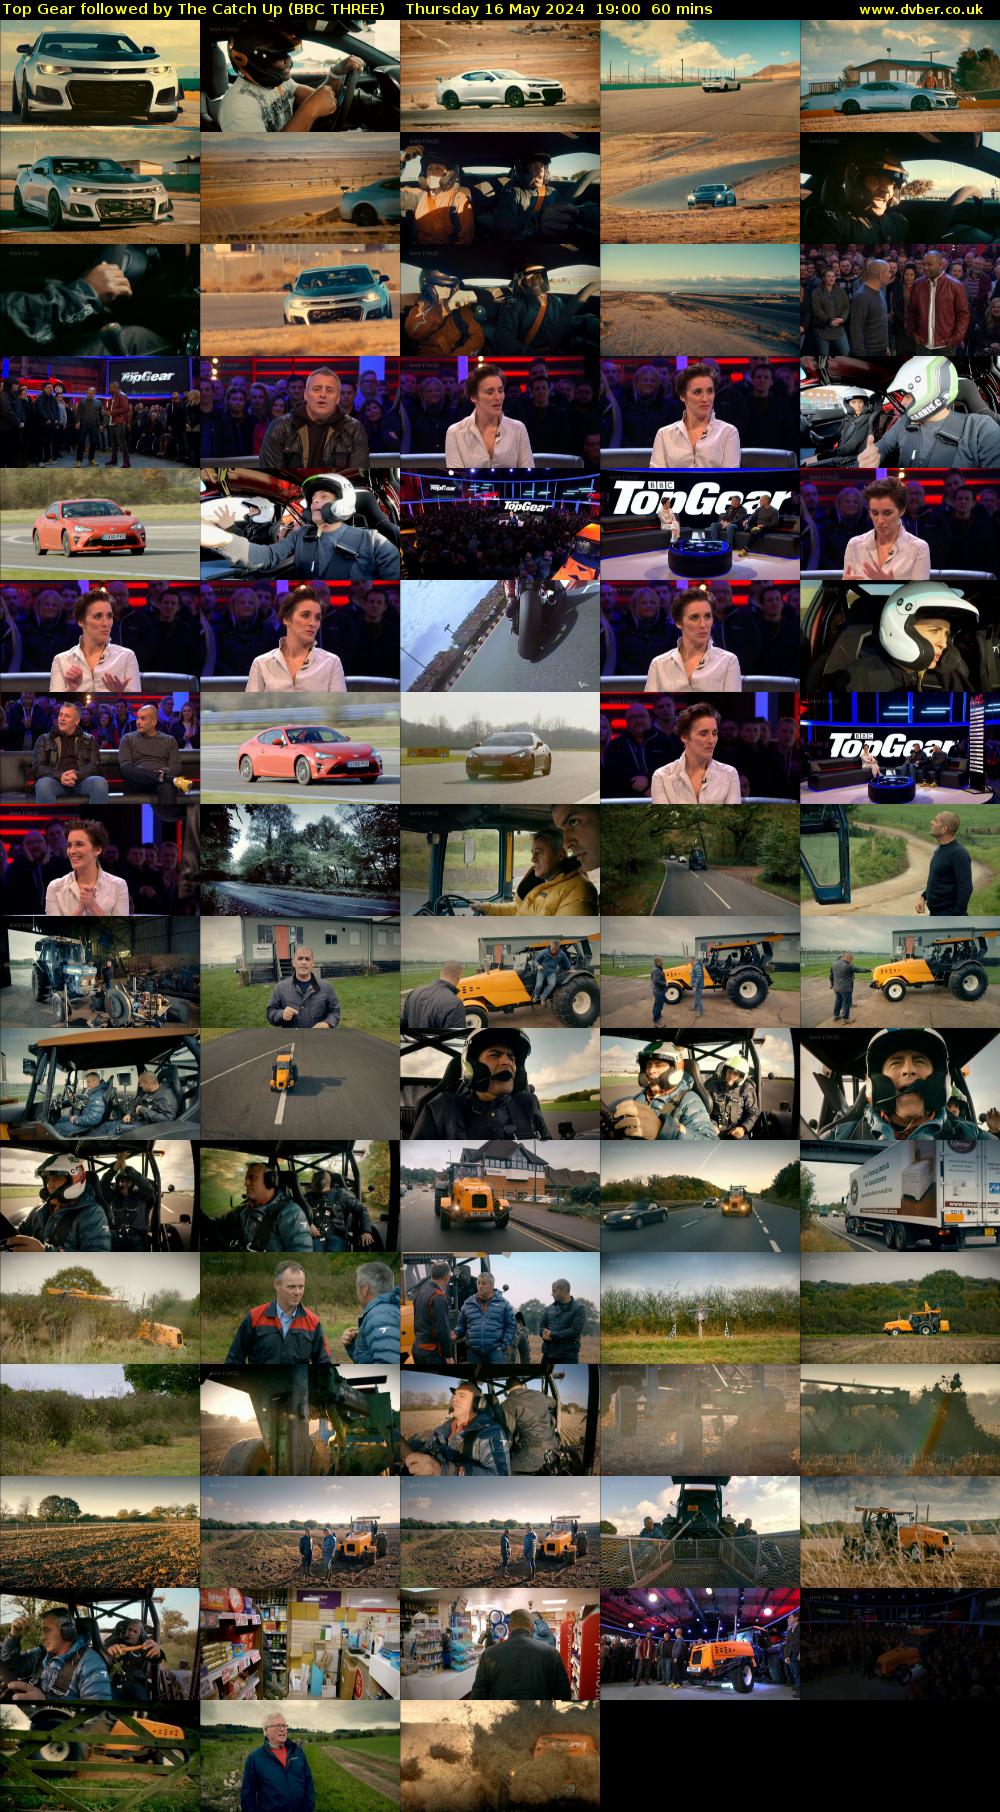 Top Gear followed by The Catch Up (BBC THREE) Thursday 16 May 2024 19:00 - 20:00